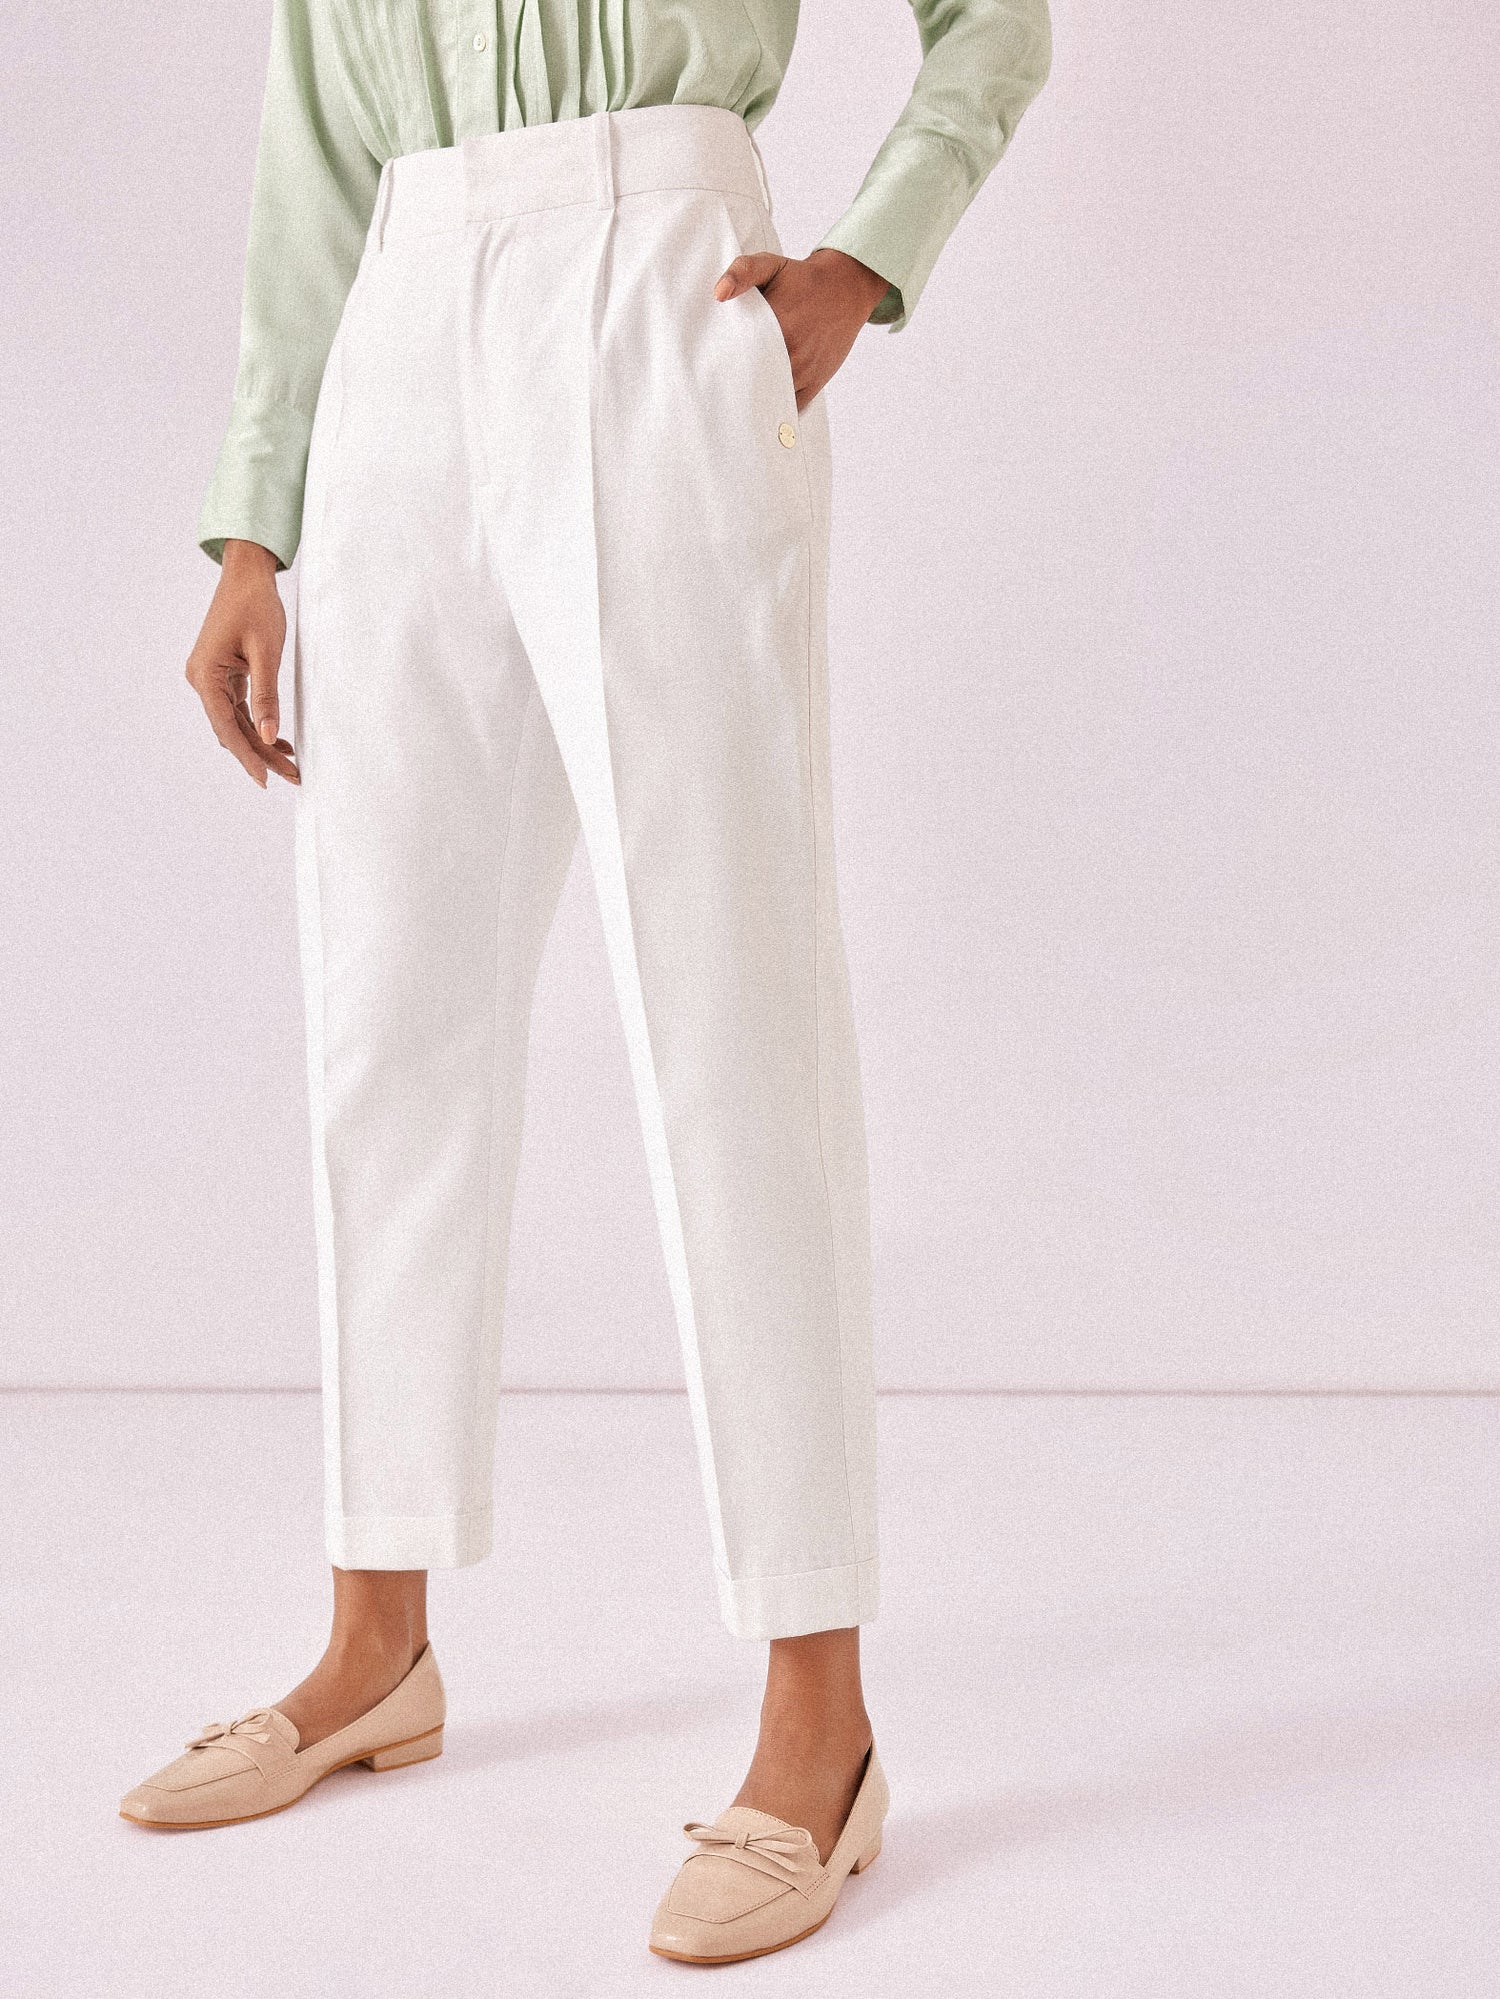 White Pleated Trousers